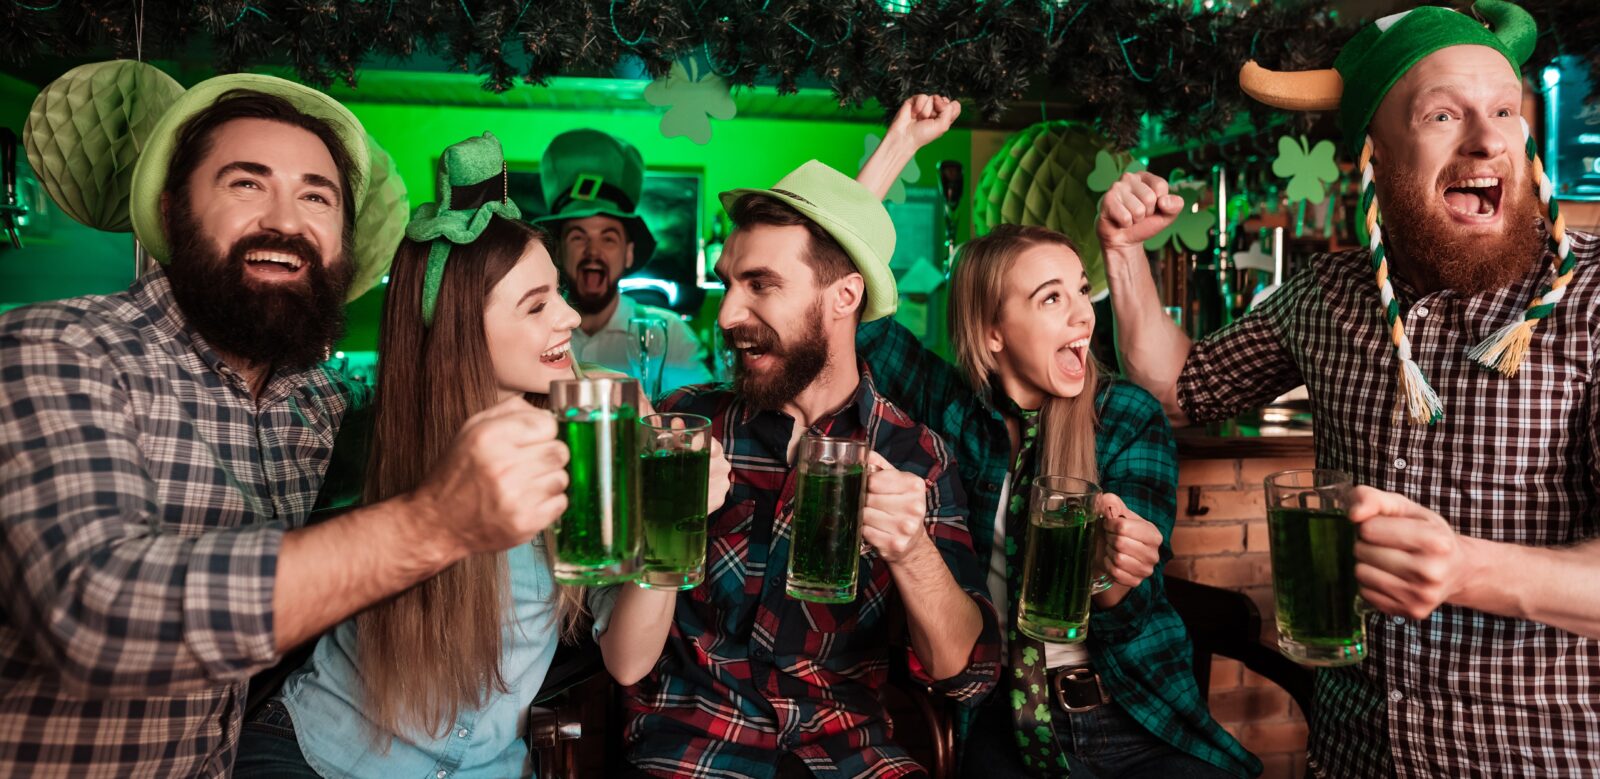 Do The Almost St. Patty’s Day Crawl in Clovis!